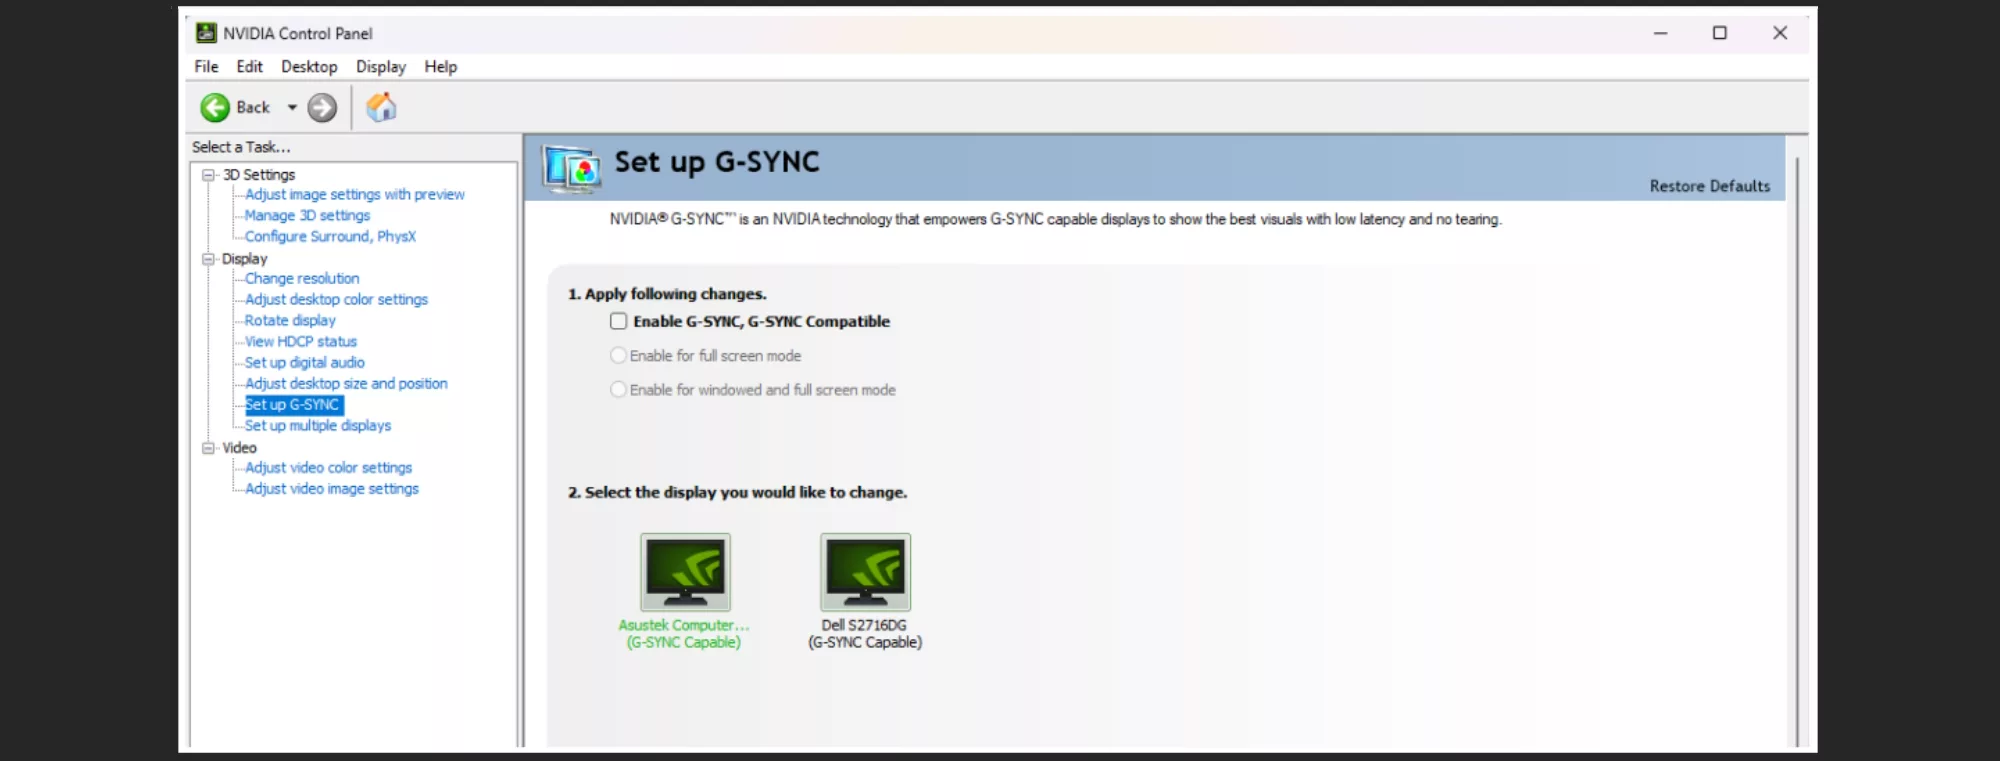 A screenshot of the NVIDIA Control Panel showing how to disable G-SYNC Variable Refresh Rate